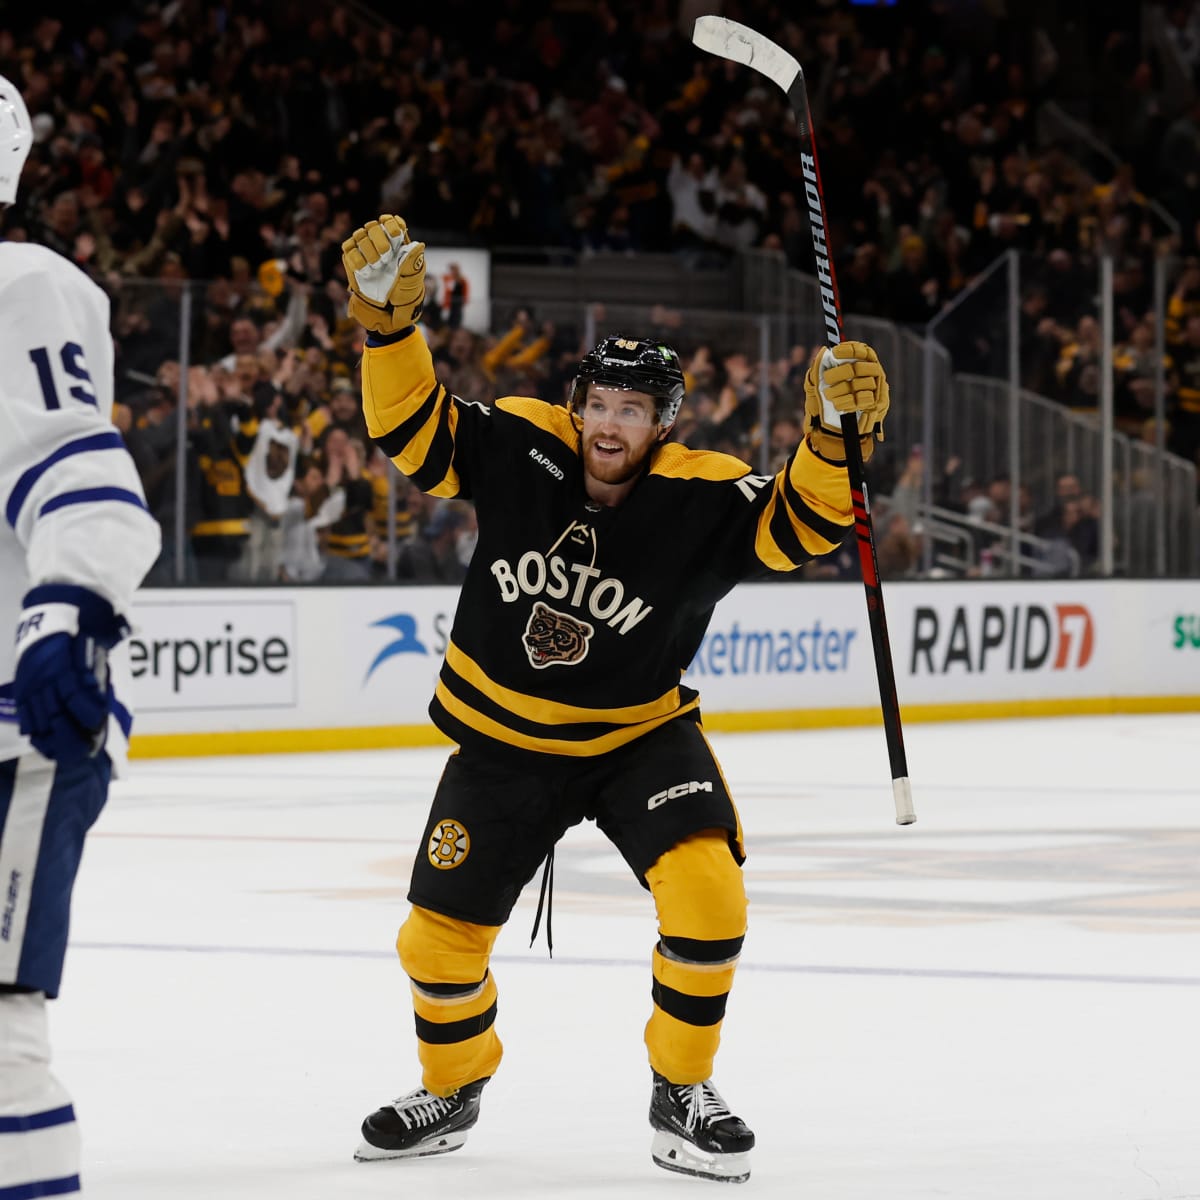 The Boston Bruins Have Extended The NHL Record For Most Home Wins To Start  A Season With Their 13th STRAIGHT WIN